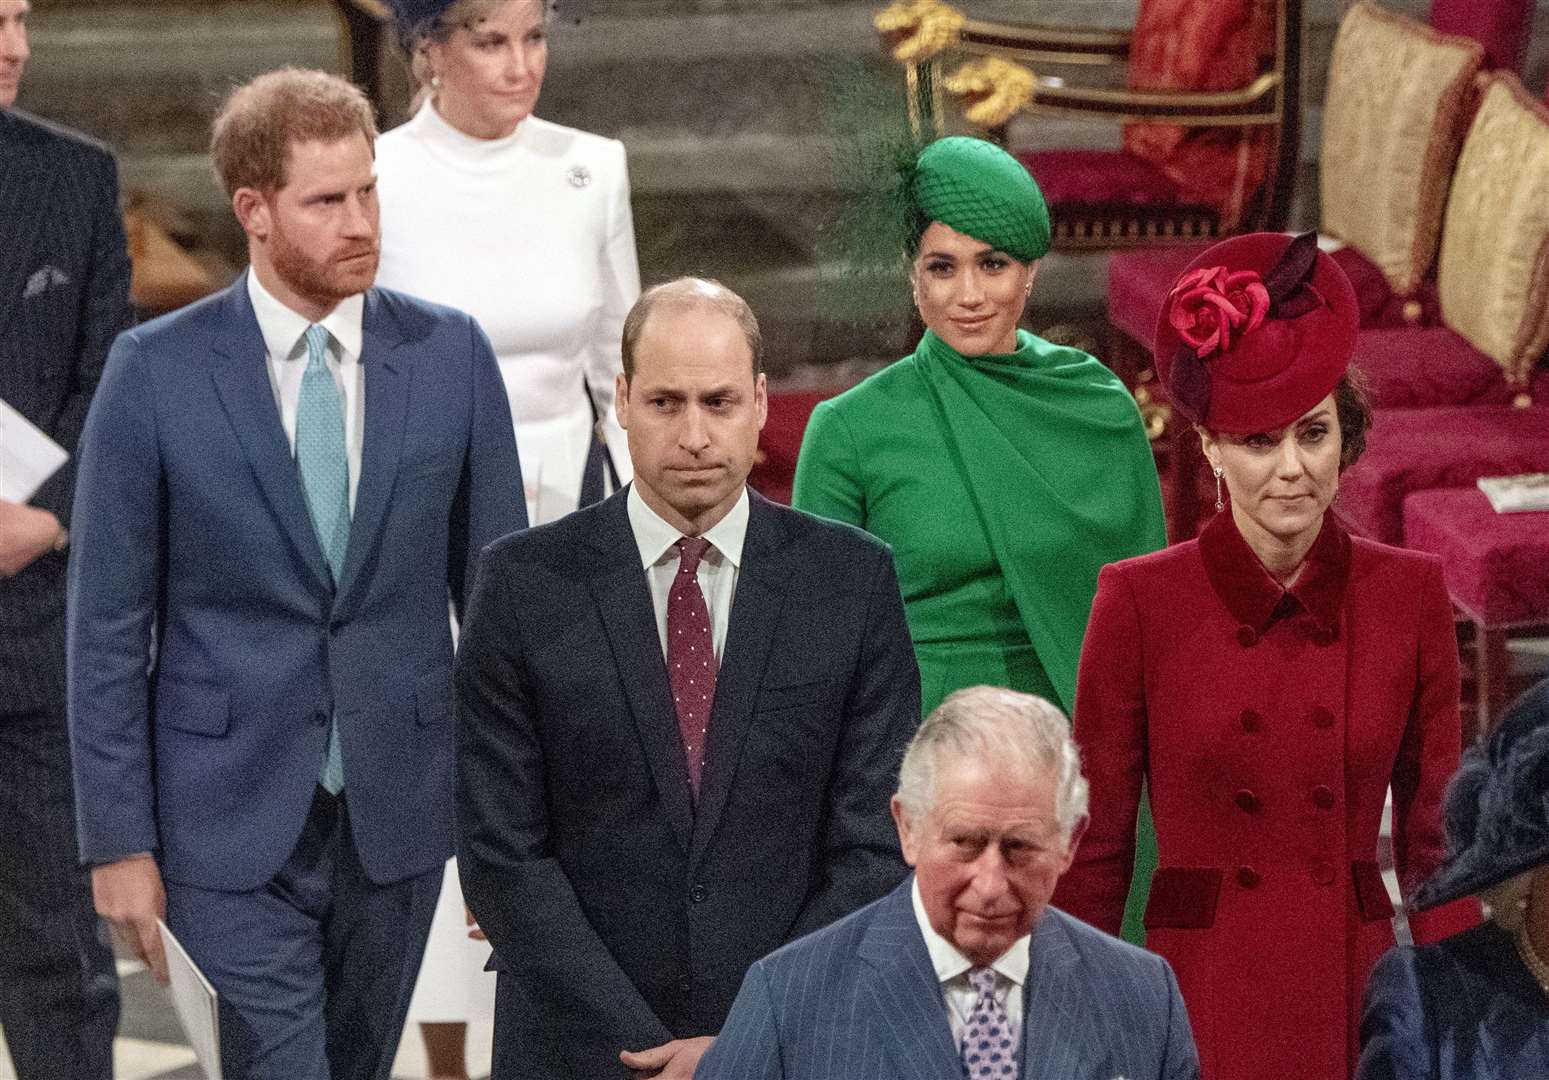 The Duke and Duchess of Sussex, the Duke and Duchess of Cambridge with the Prince of Wales during the Commonwealth Service at Westminster Abbey (Phil Harris/Daily Mirror)